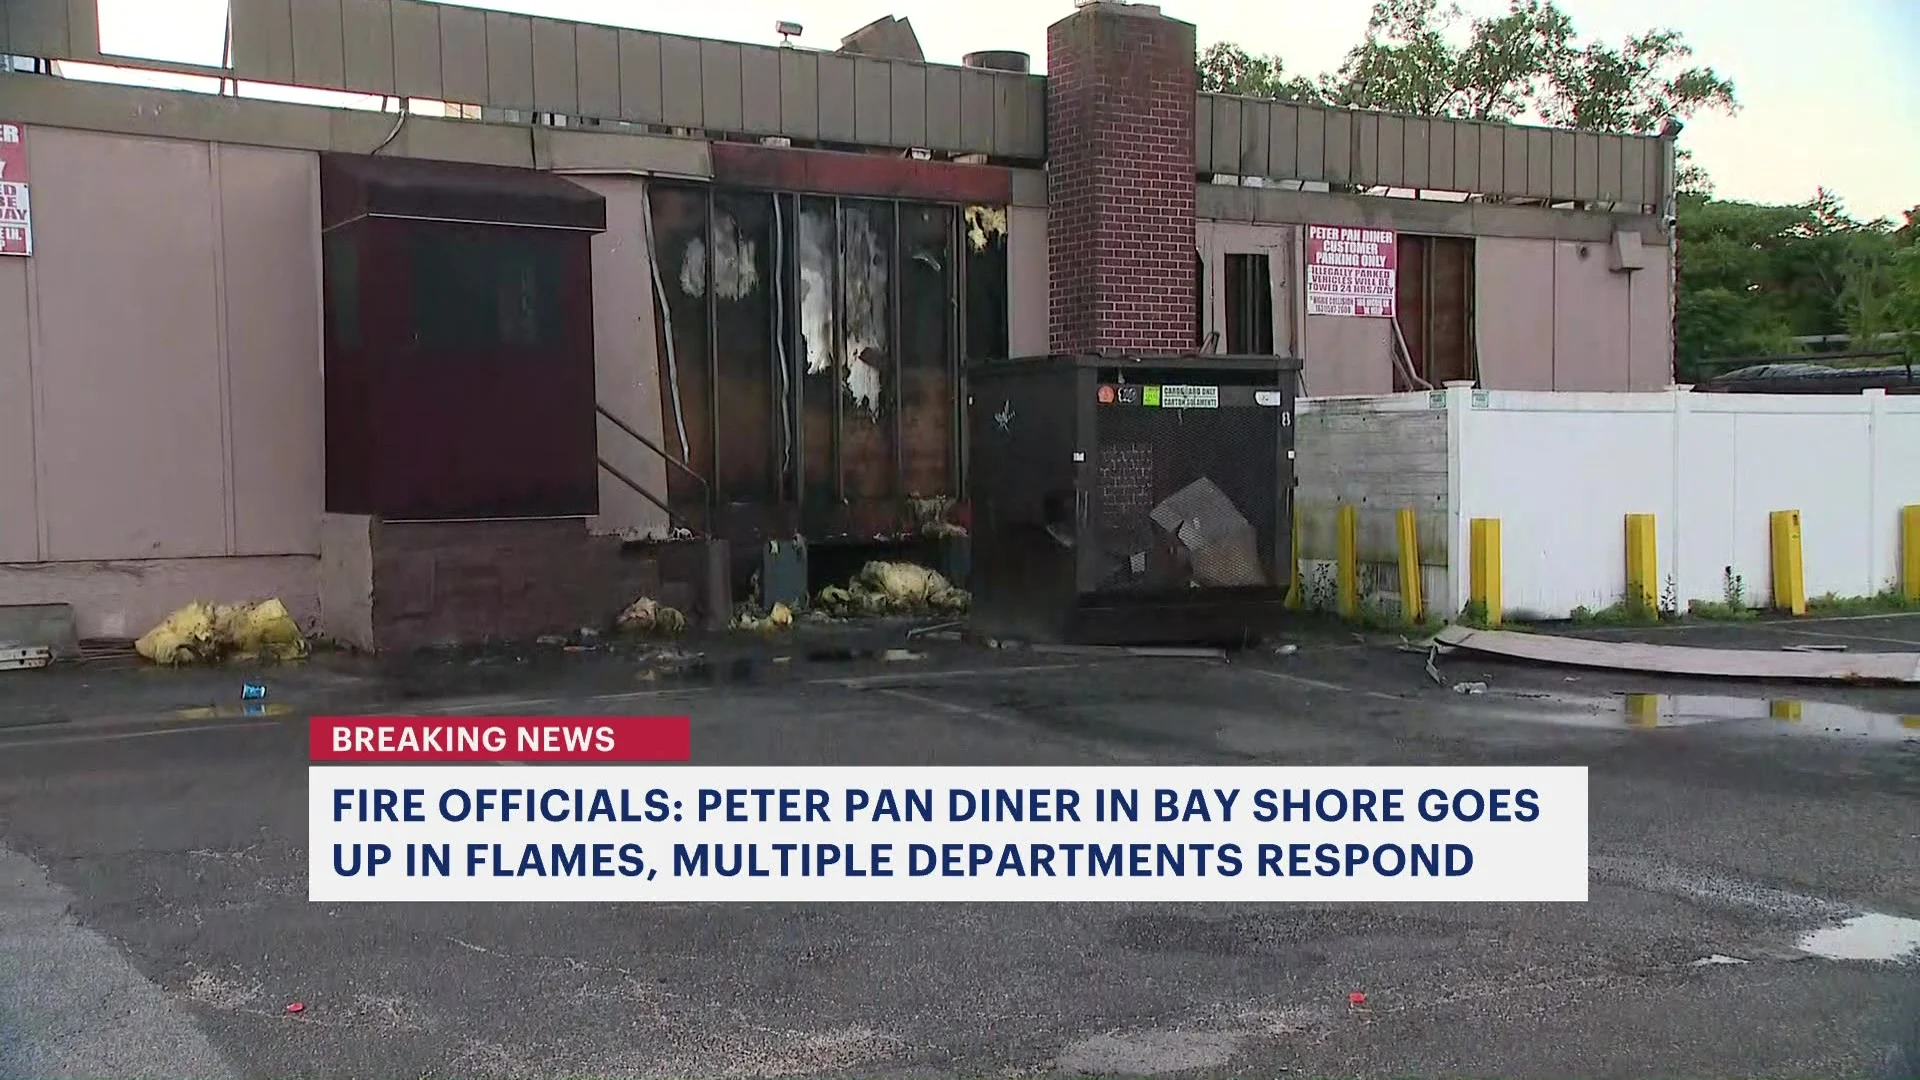 Officials: Peter Pan Diner in Bay Shore goes up in flames, multiple departments respond